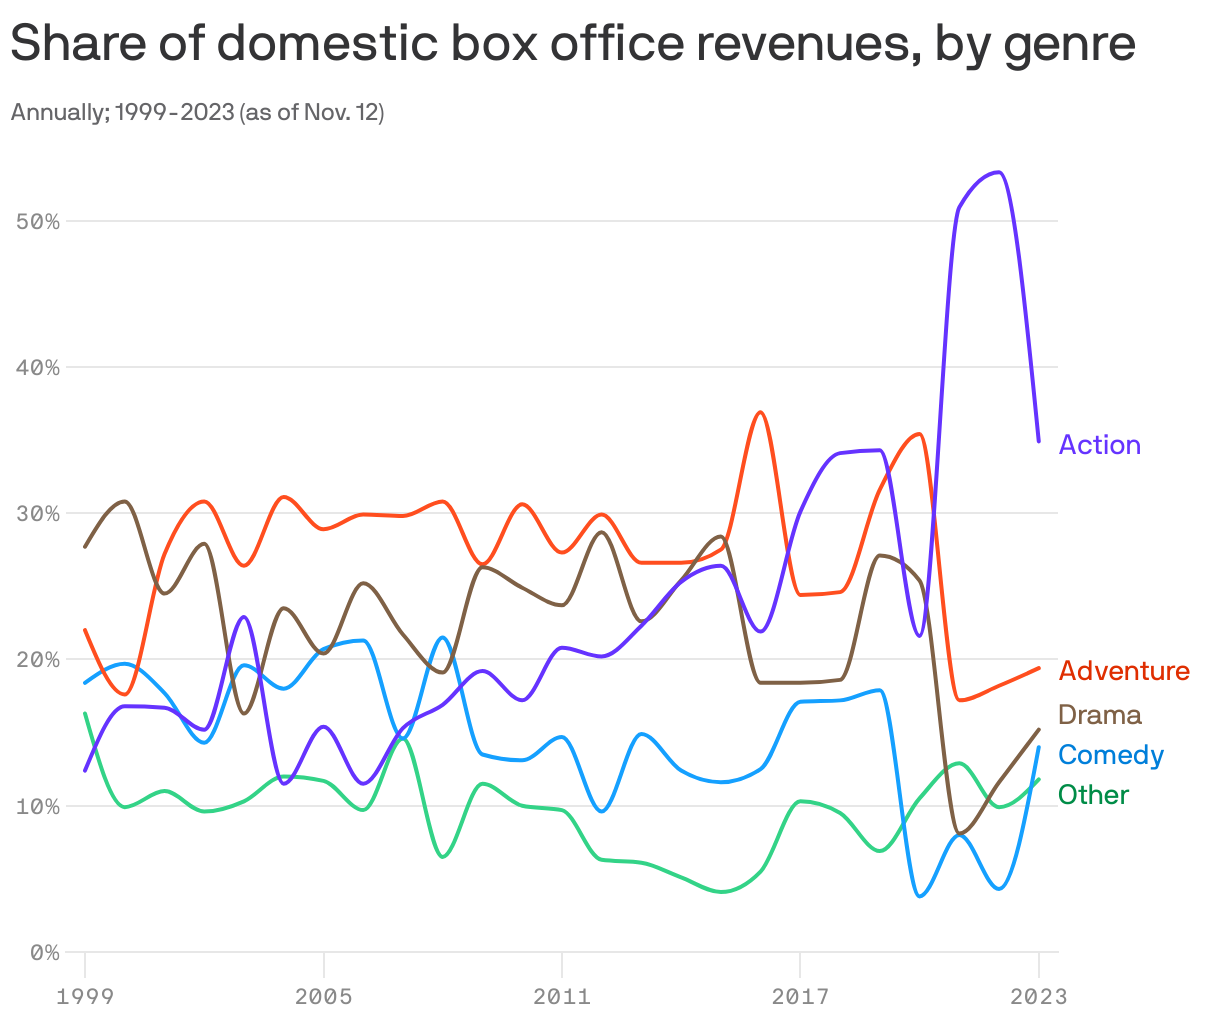 Share of domestic box office revenues, by genre